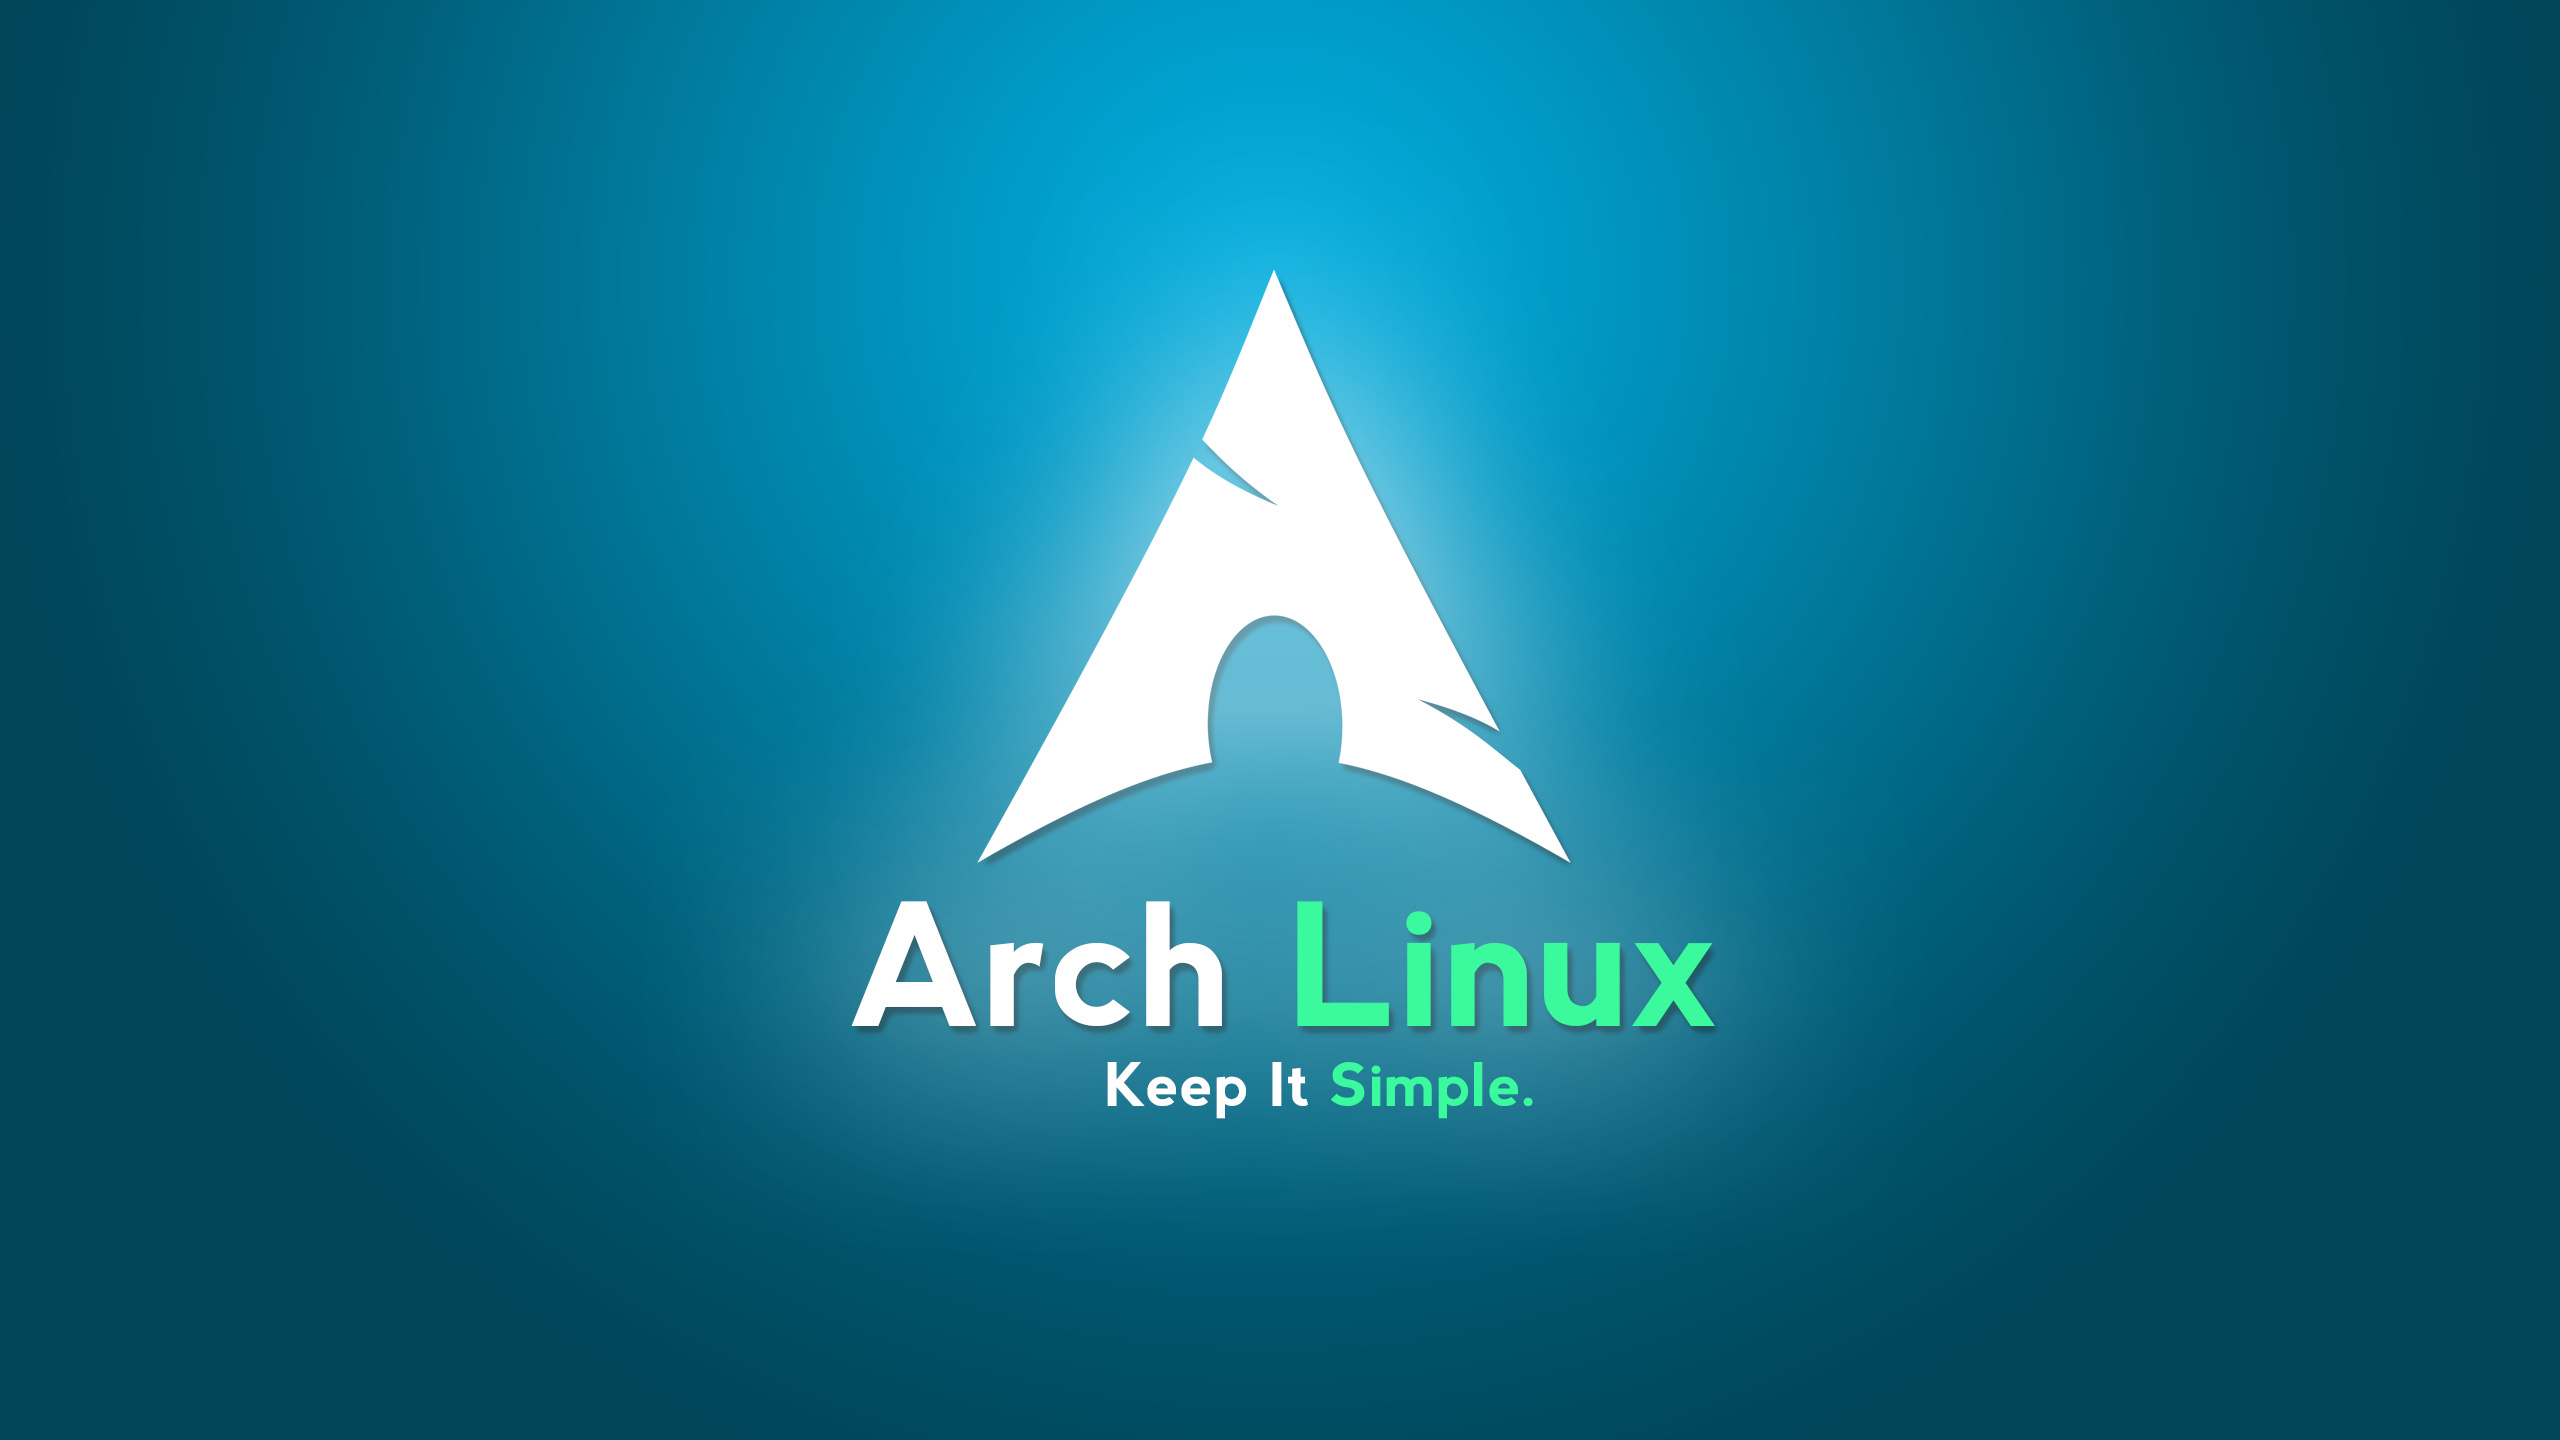 Official Arch Linux Iso Image To Drop 32 Bit I686 Support Starting